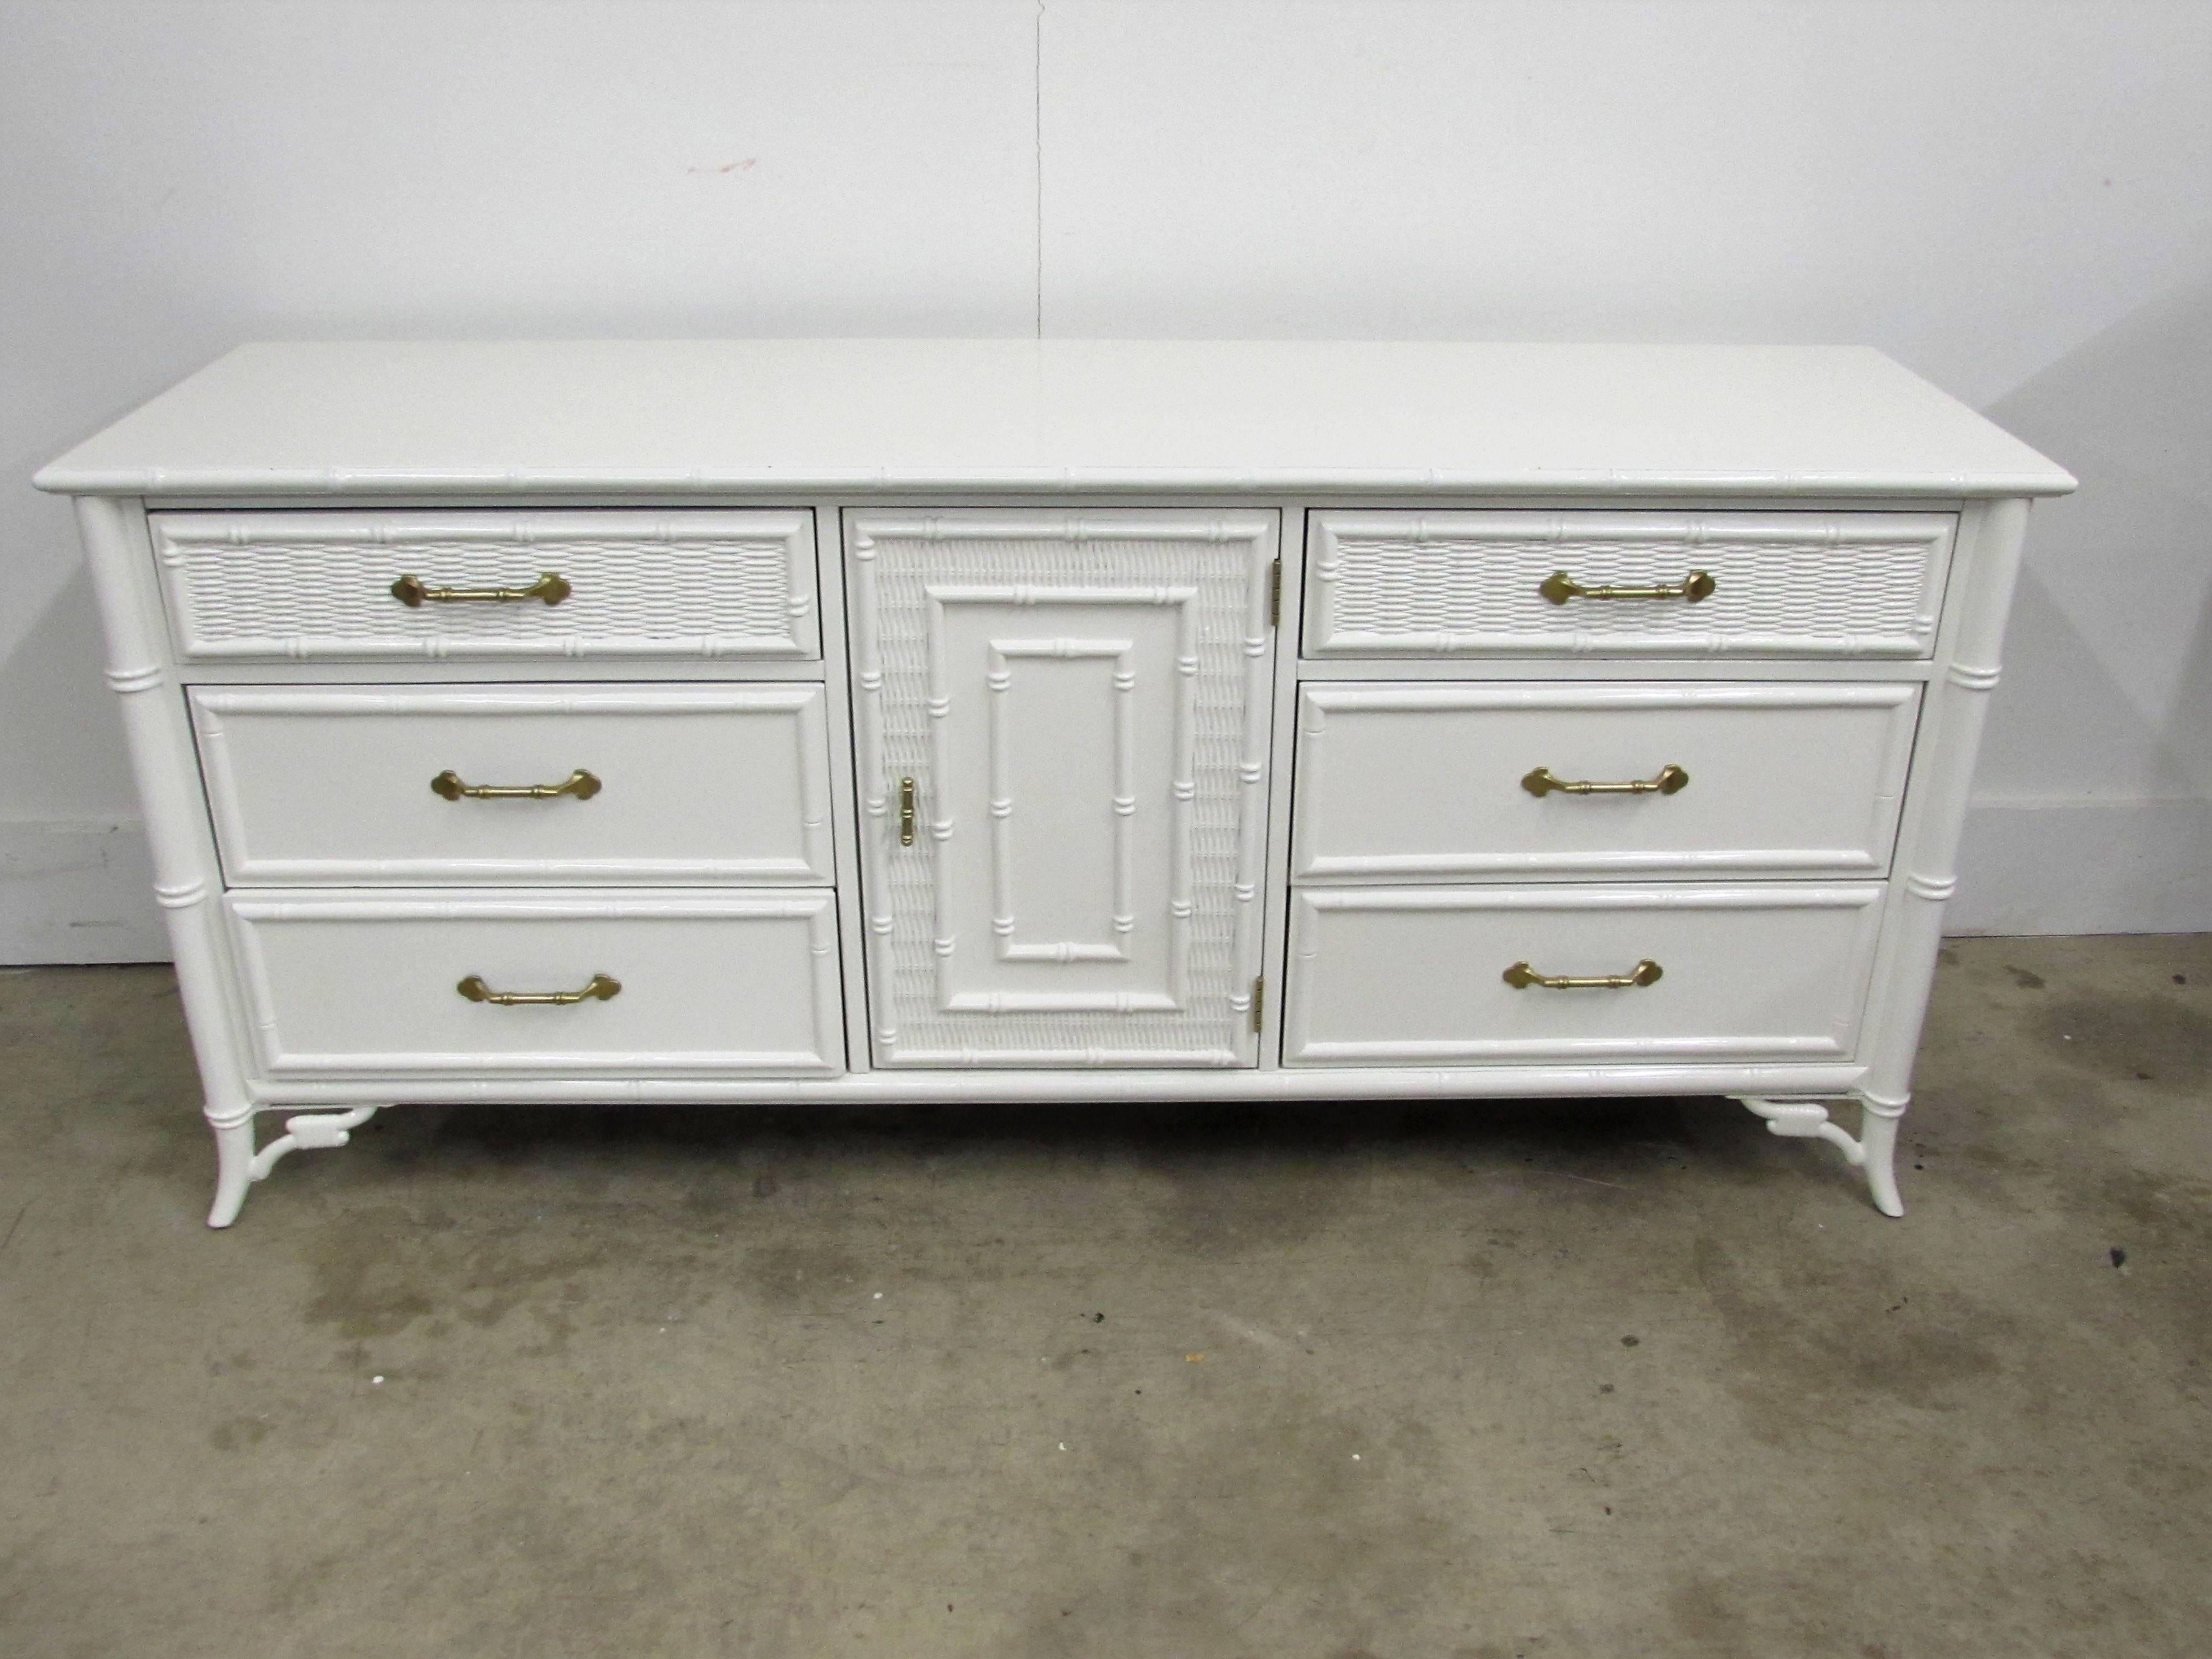 Stanley faux bamboo chest of drawers lacquered in-house in alabaster white gloss finish with nine dovetail drawers with woven and faux bamboo accents, three sets of drawers on each side of one swinging door that open to three additional drawers, two